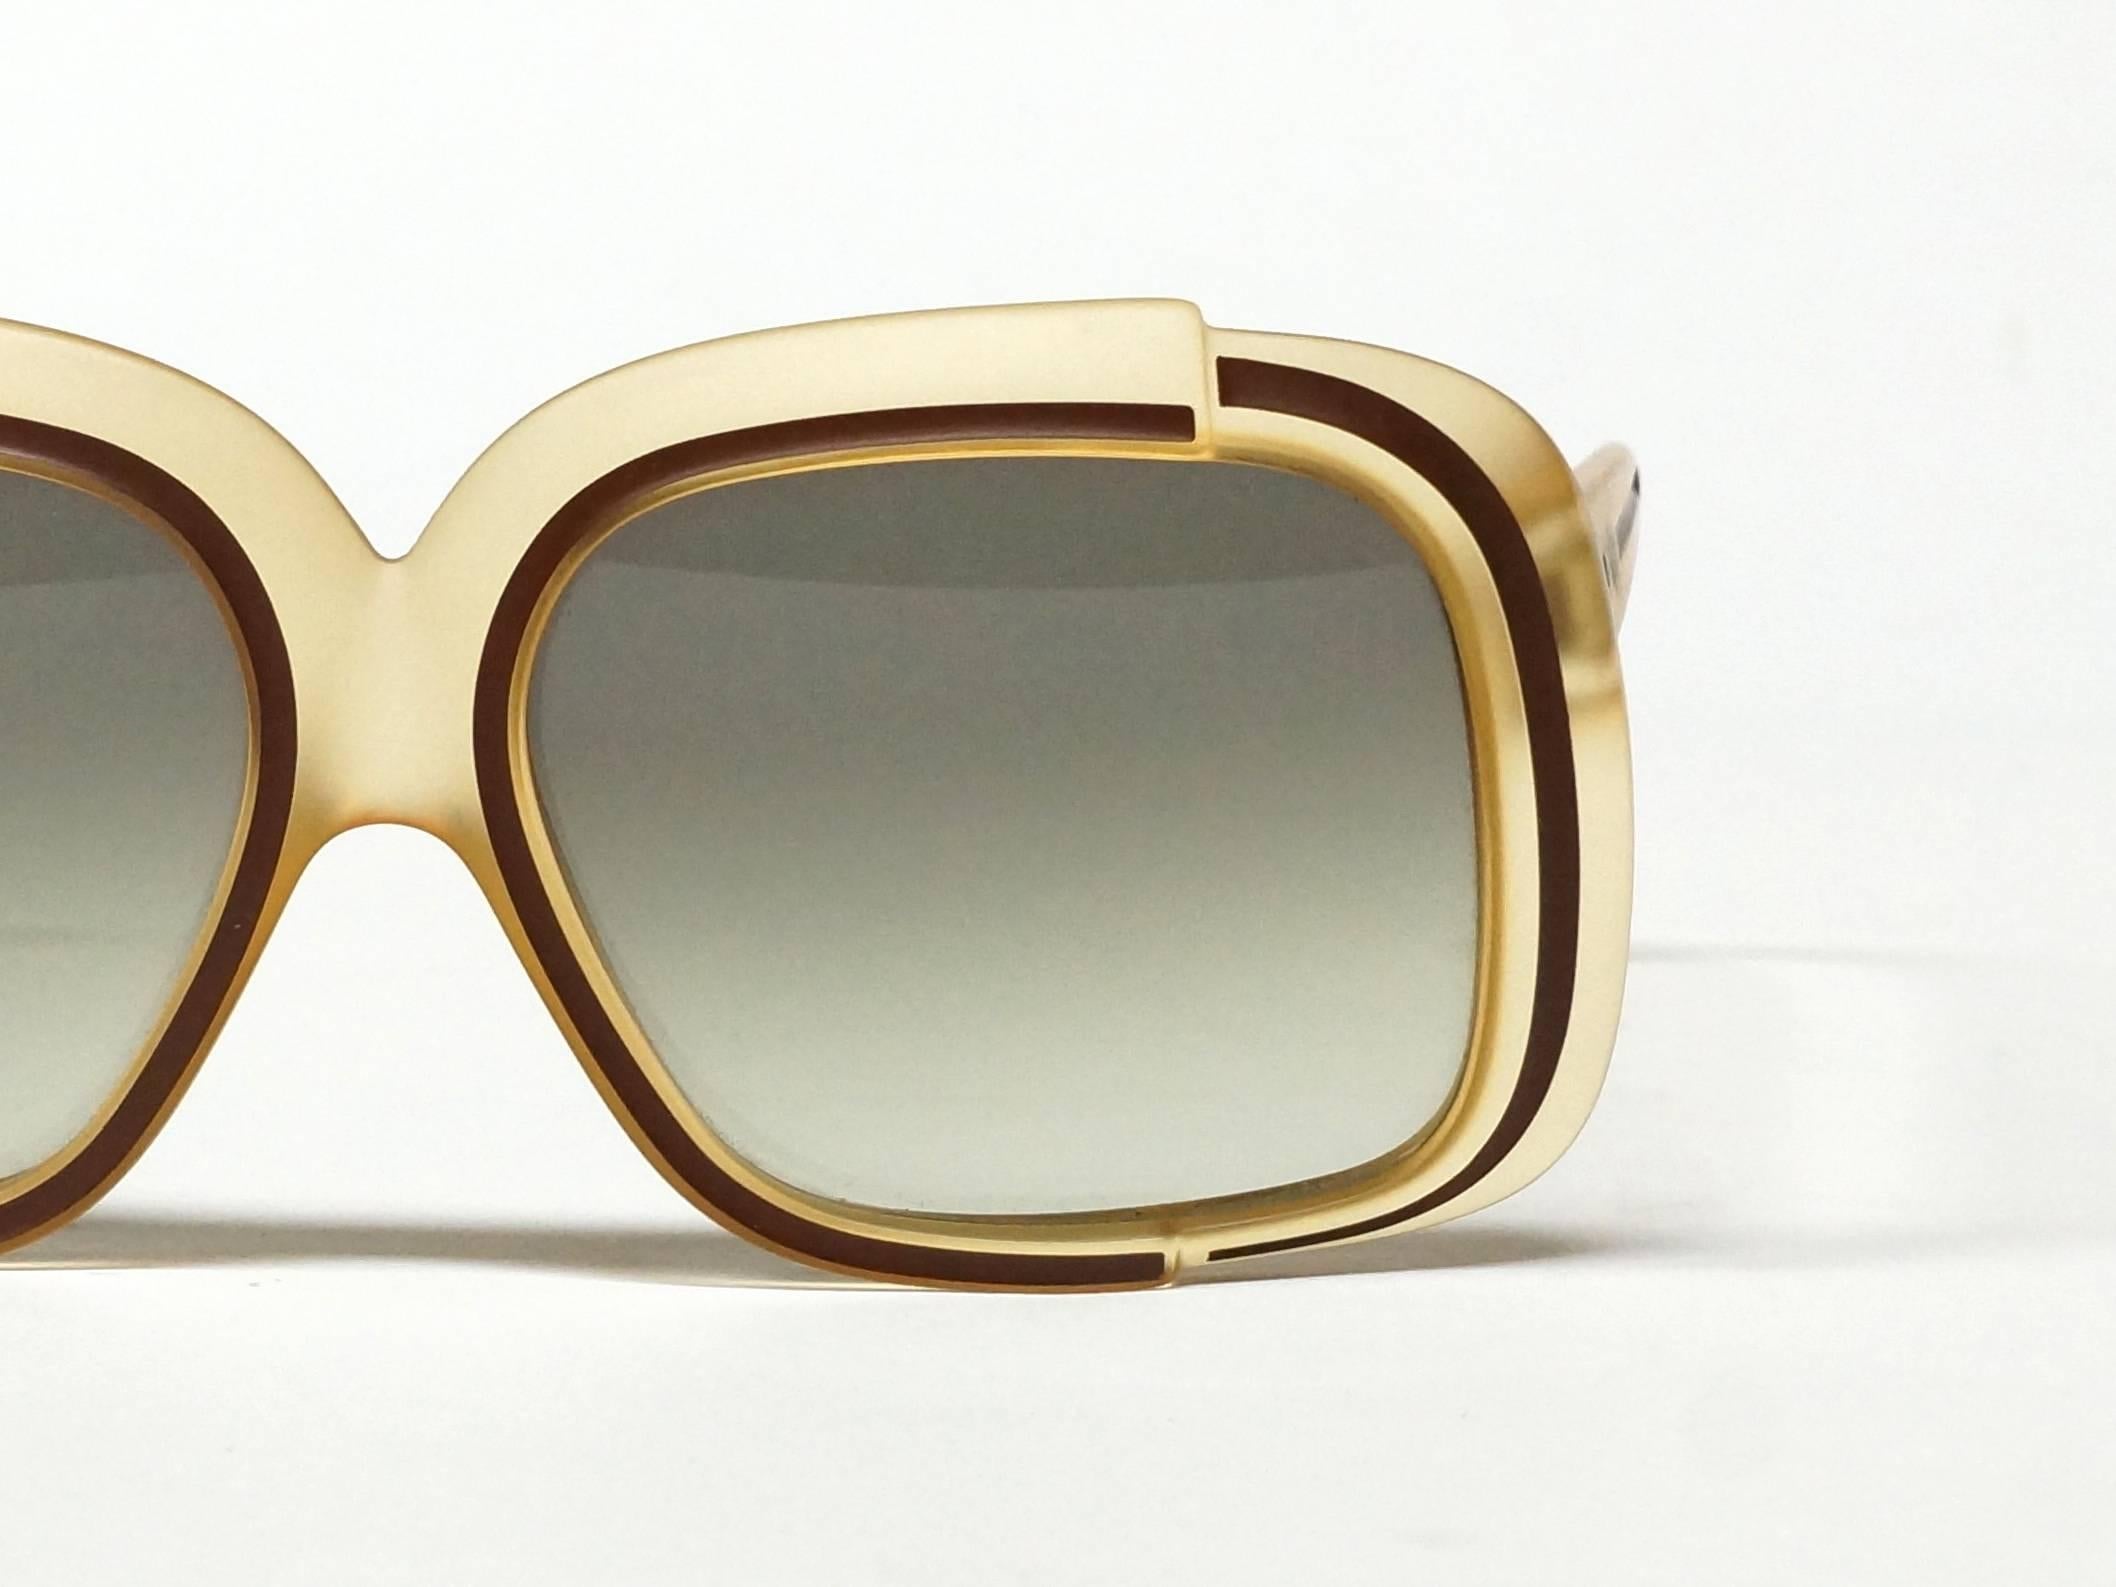 1970s Christian Dior Sunglasses in New Old Stock Condition For Sale 3